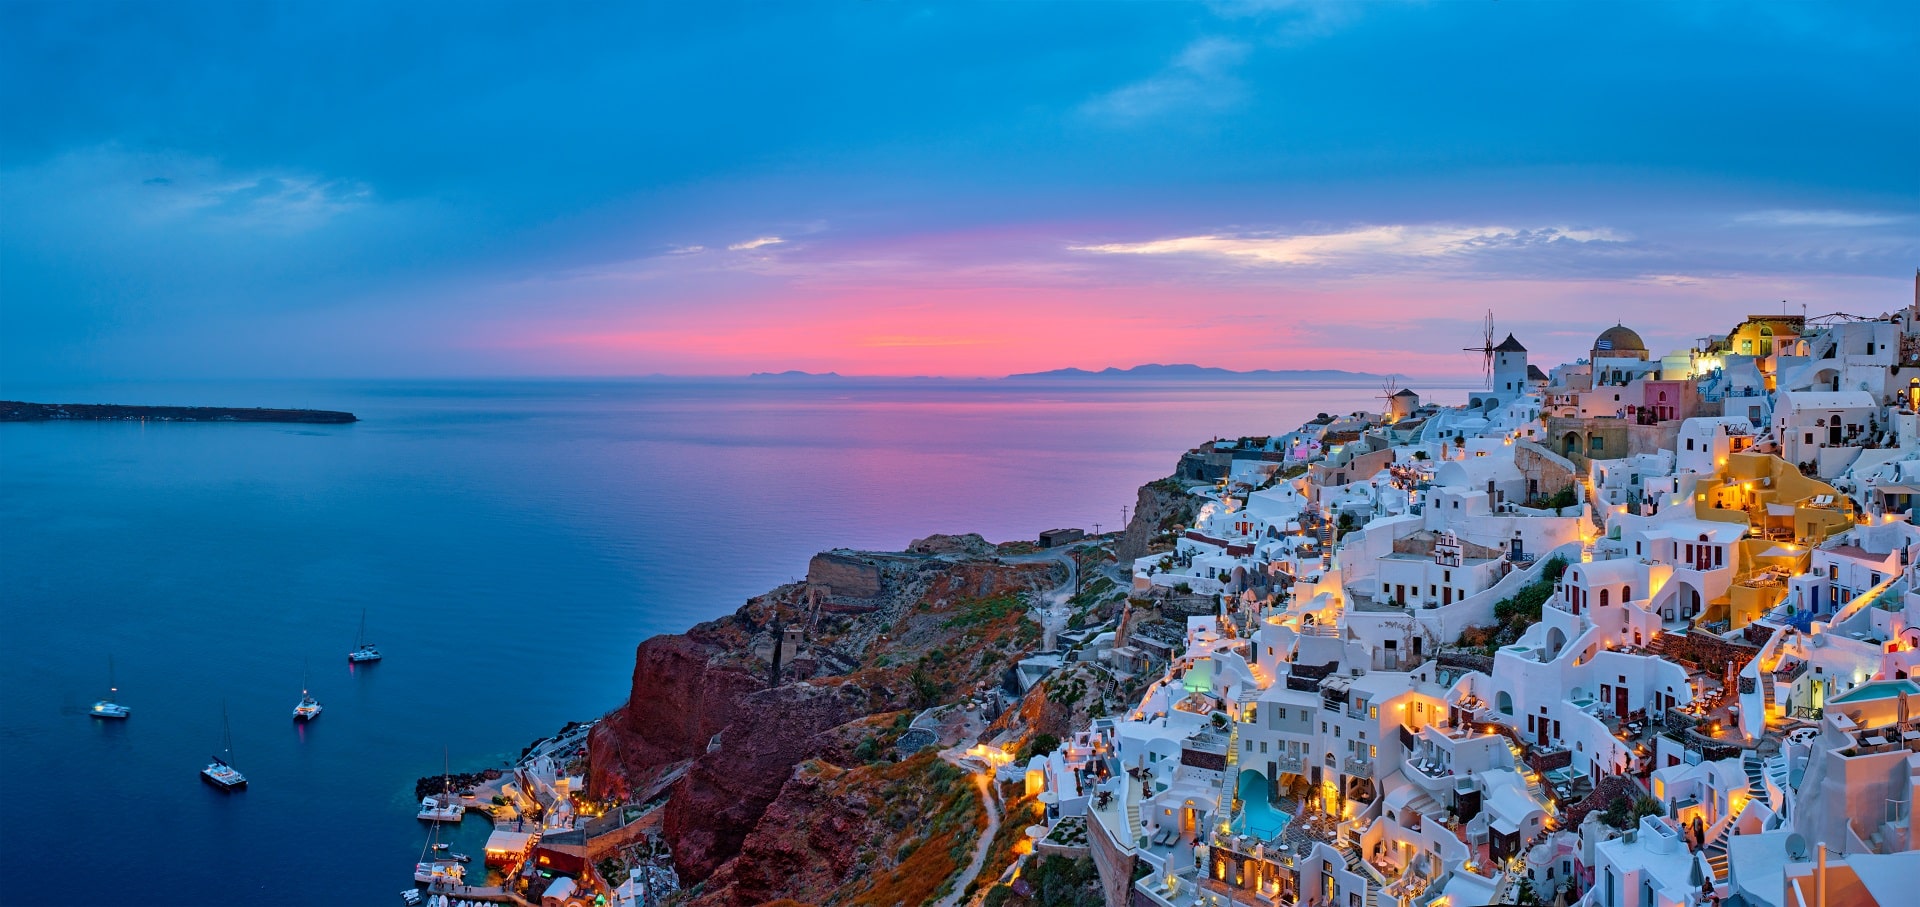 Oia village with traditional white houses and windmills in Santorini island